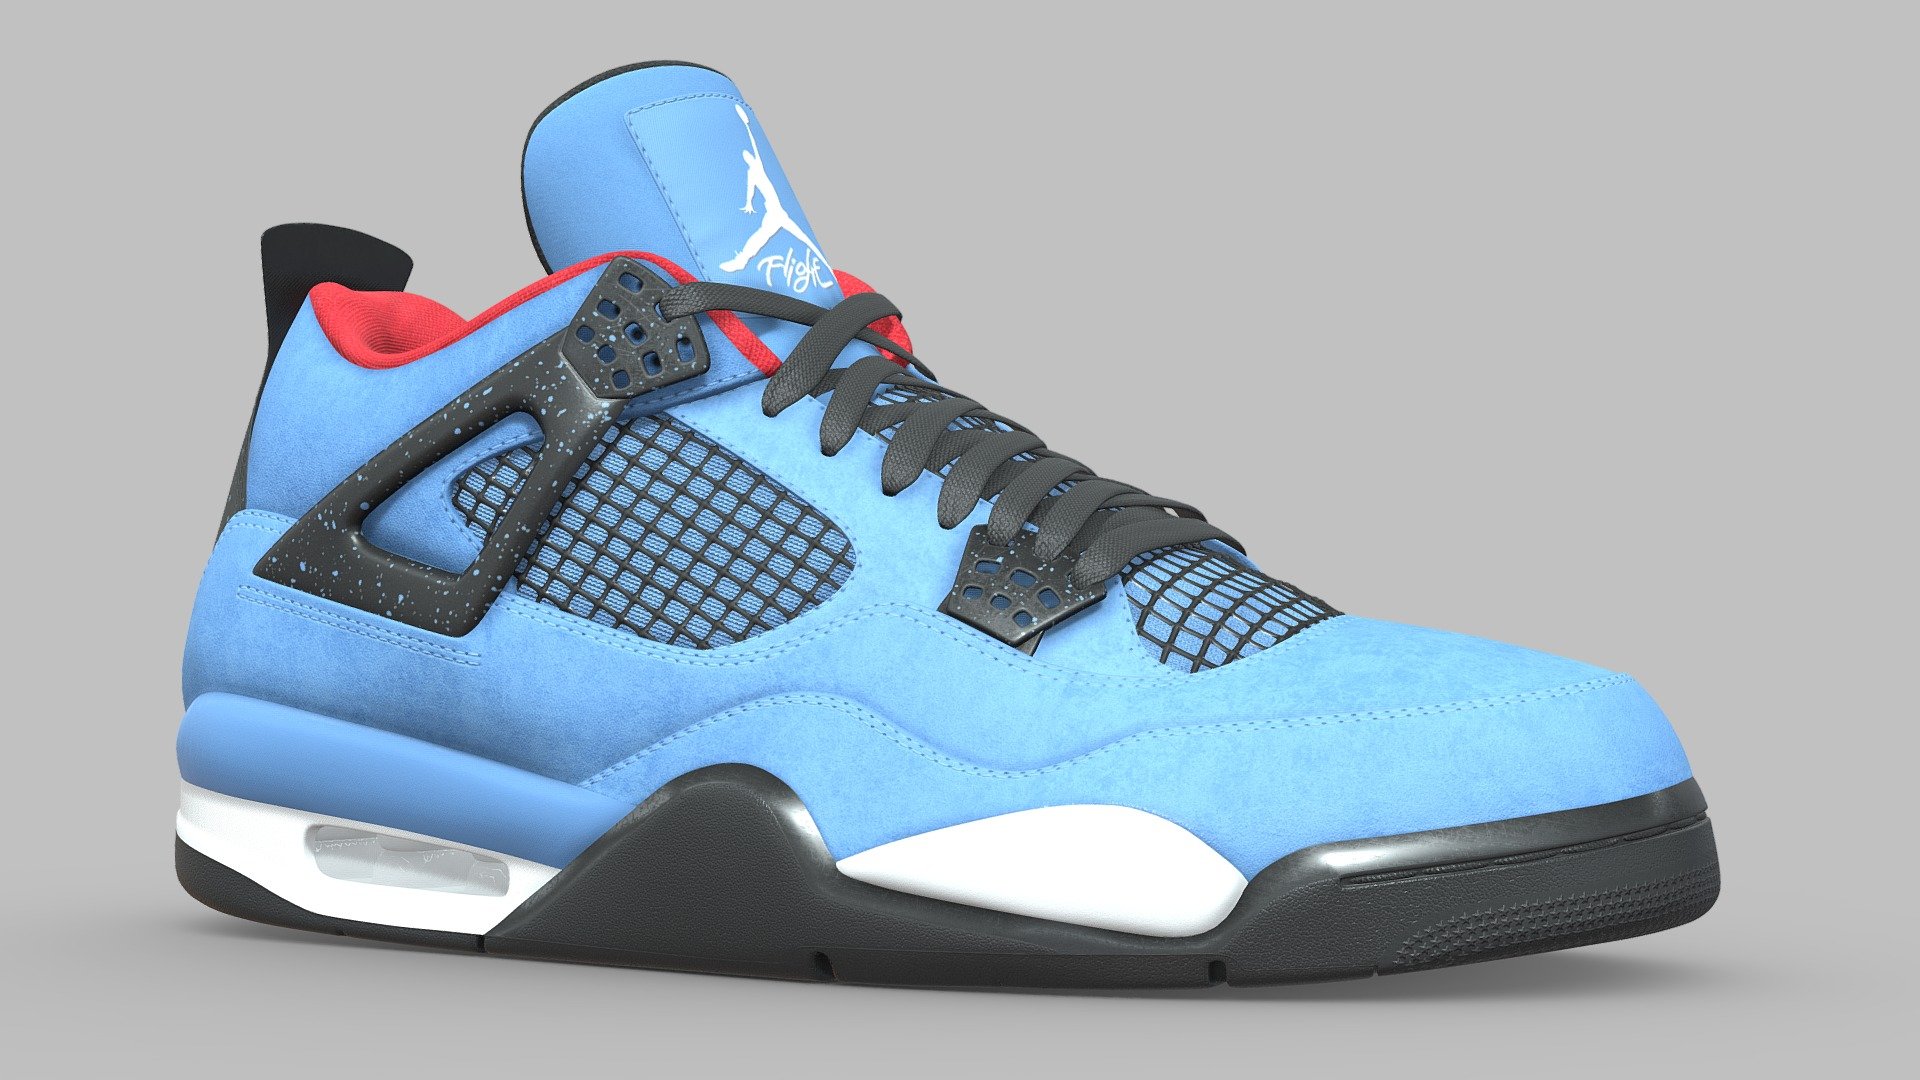 Iconic Jordan shoe with one of its most hyped up colourways. The Jordan 4 Cactus Jack, designed by Houston rapper Travis Scott are a sight to behold. This shoe features a lighter shade of blue suede on the upper. Black accents, a red liner, paint splatter detailing, a white midsole and “Cactus Jack” branding on the back heel tab finish things off.

This model is a 1:1 replication of the original. All dimensions, angles, and curves are the same as the real life counterpart. The shoe is subdivision ready with a base polycount of 56,640 polys per shoe. The mesh uses four texture sets, all at 4096x4096 resolution, with the following maps in use: Base Color, Metallic, Roughness, Normal. The base color map contains the transparency information.

There is an optimized, One Mesh version which has a lower polycount, 25,872 polys per shoe. This was achieved by removing small stitches and smoothing out the sole of the shoe

The main Blender files contain the full texture setup 3d model